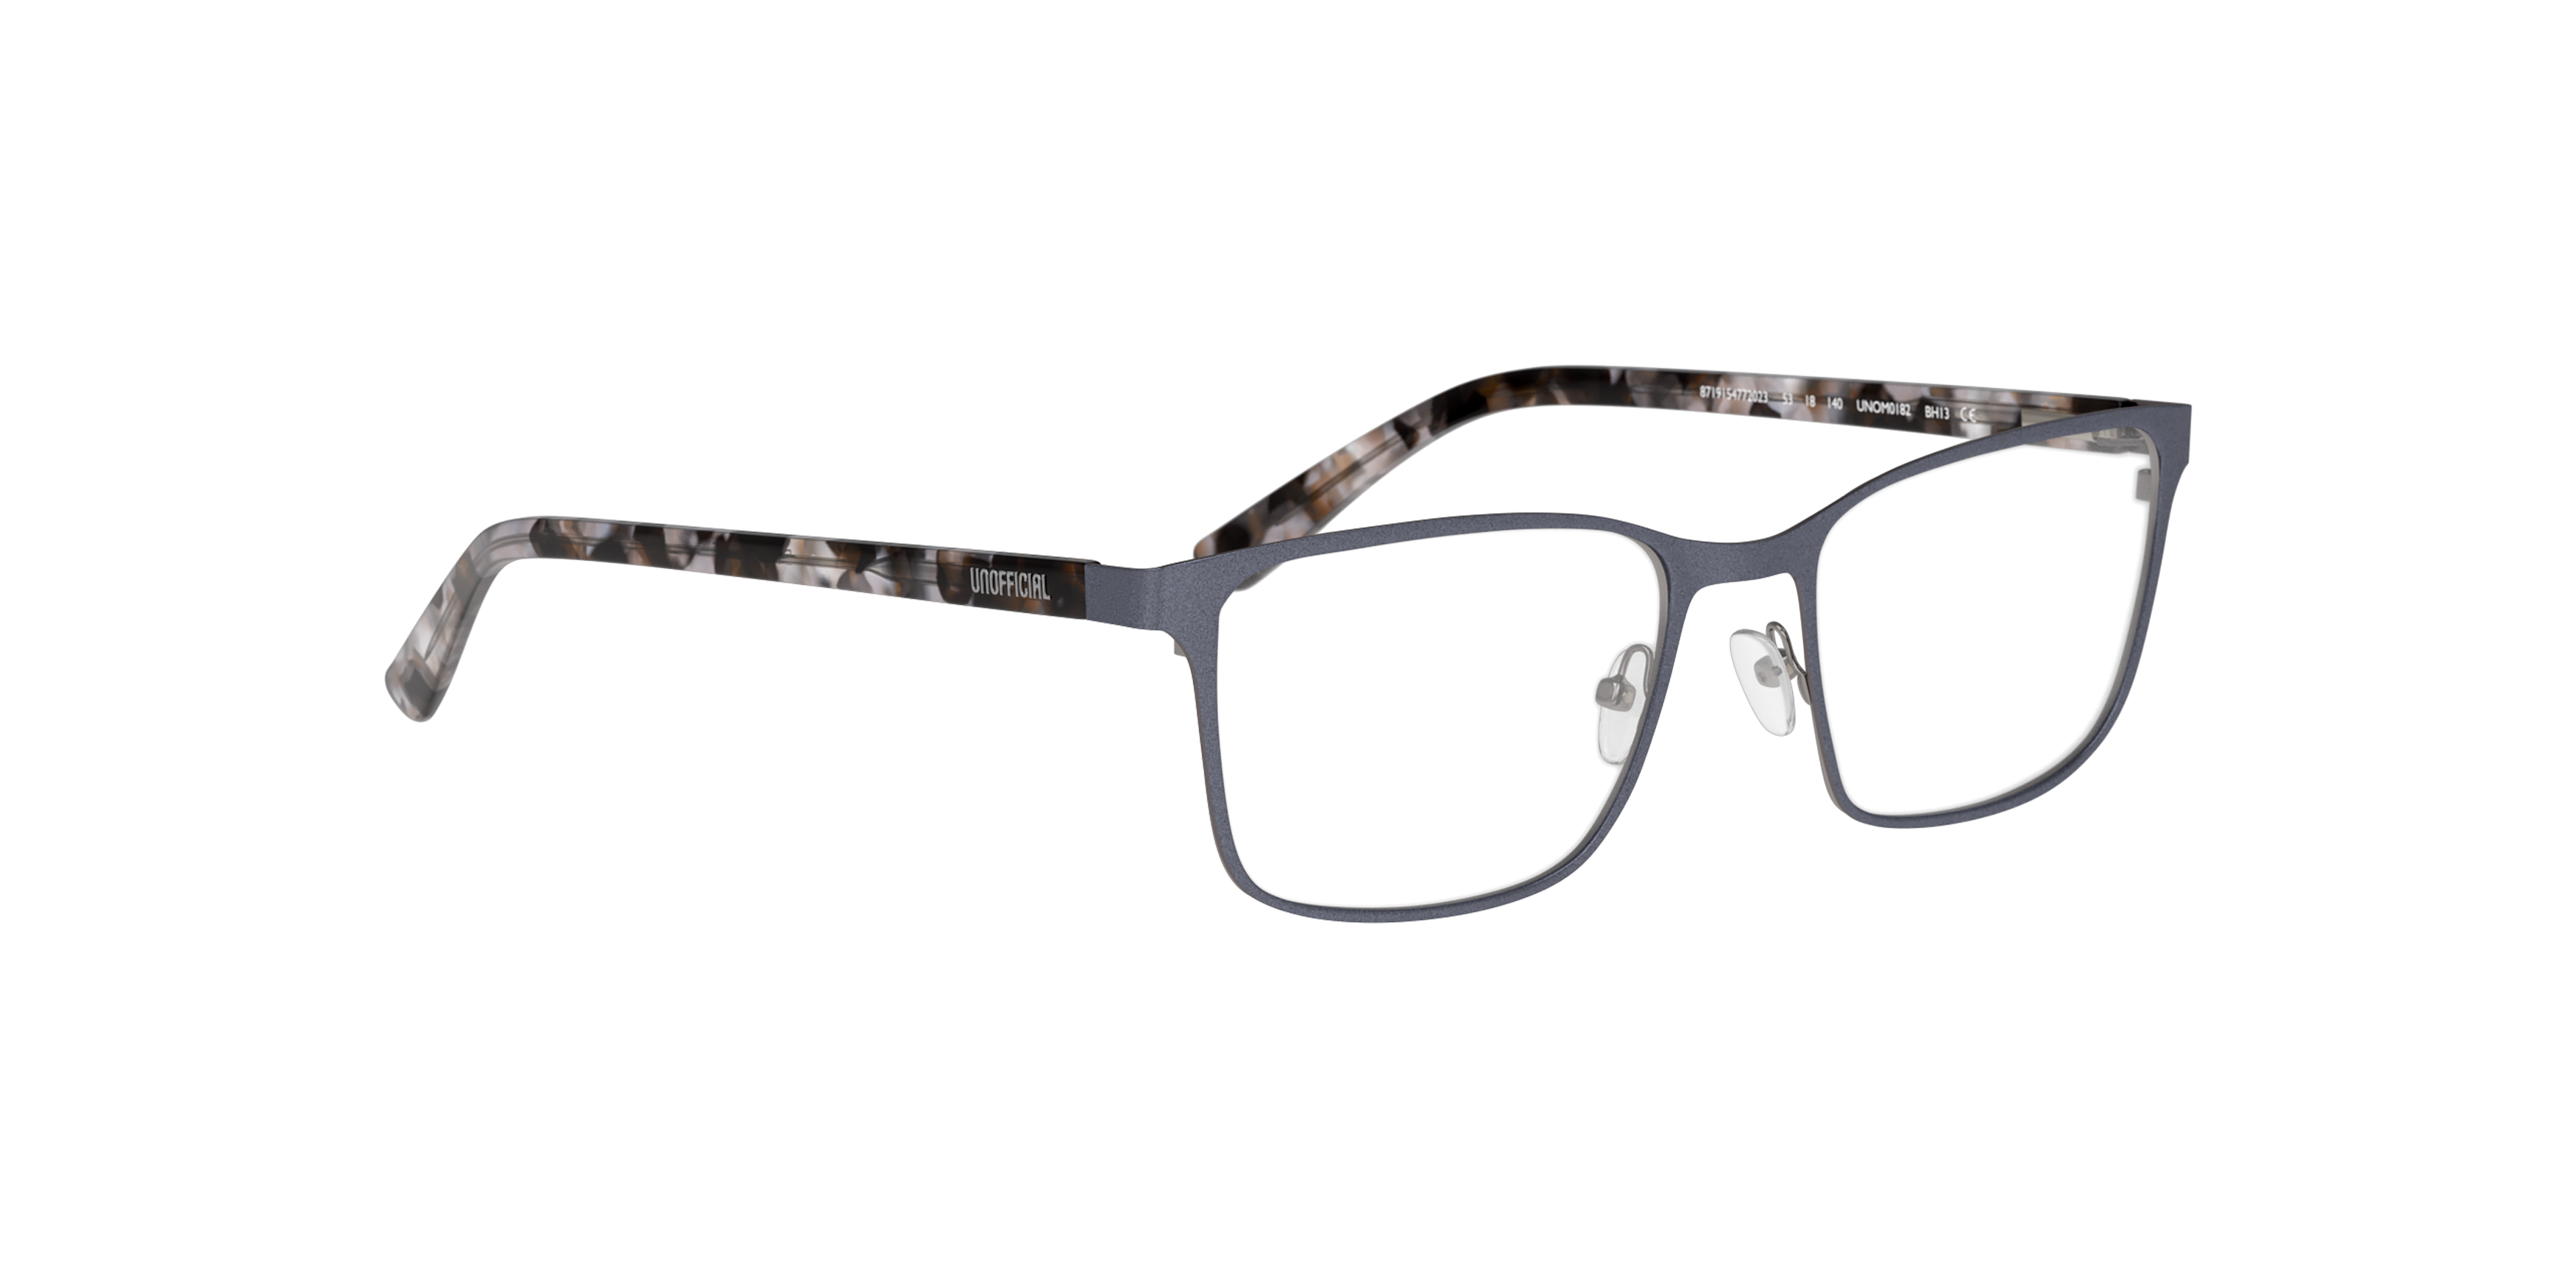 Angle_Right01 Unofficial UNOM0182 (GH00) Glasses Transparent / Grey